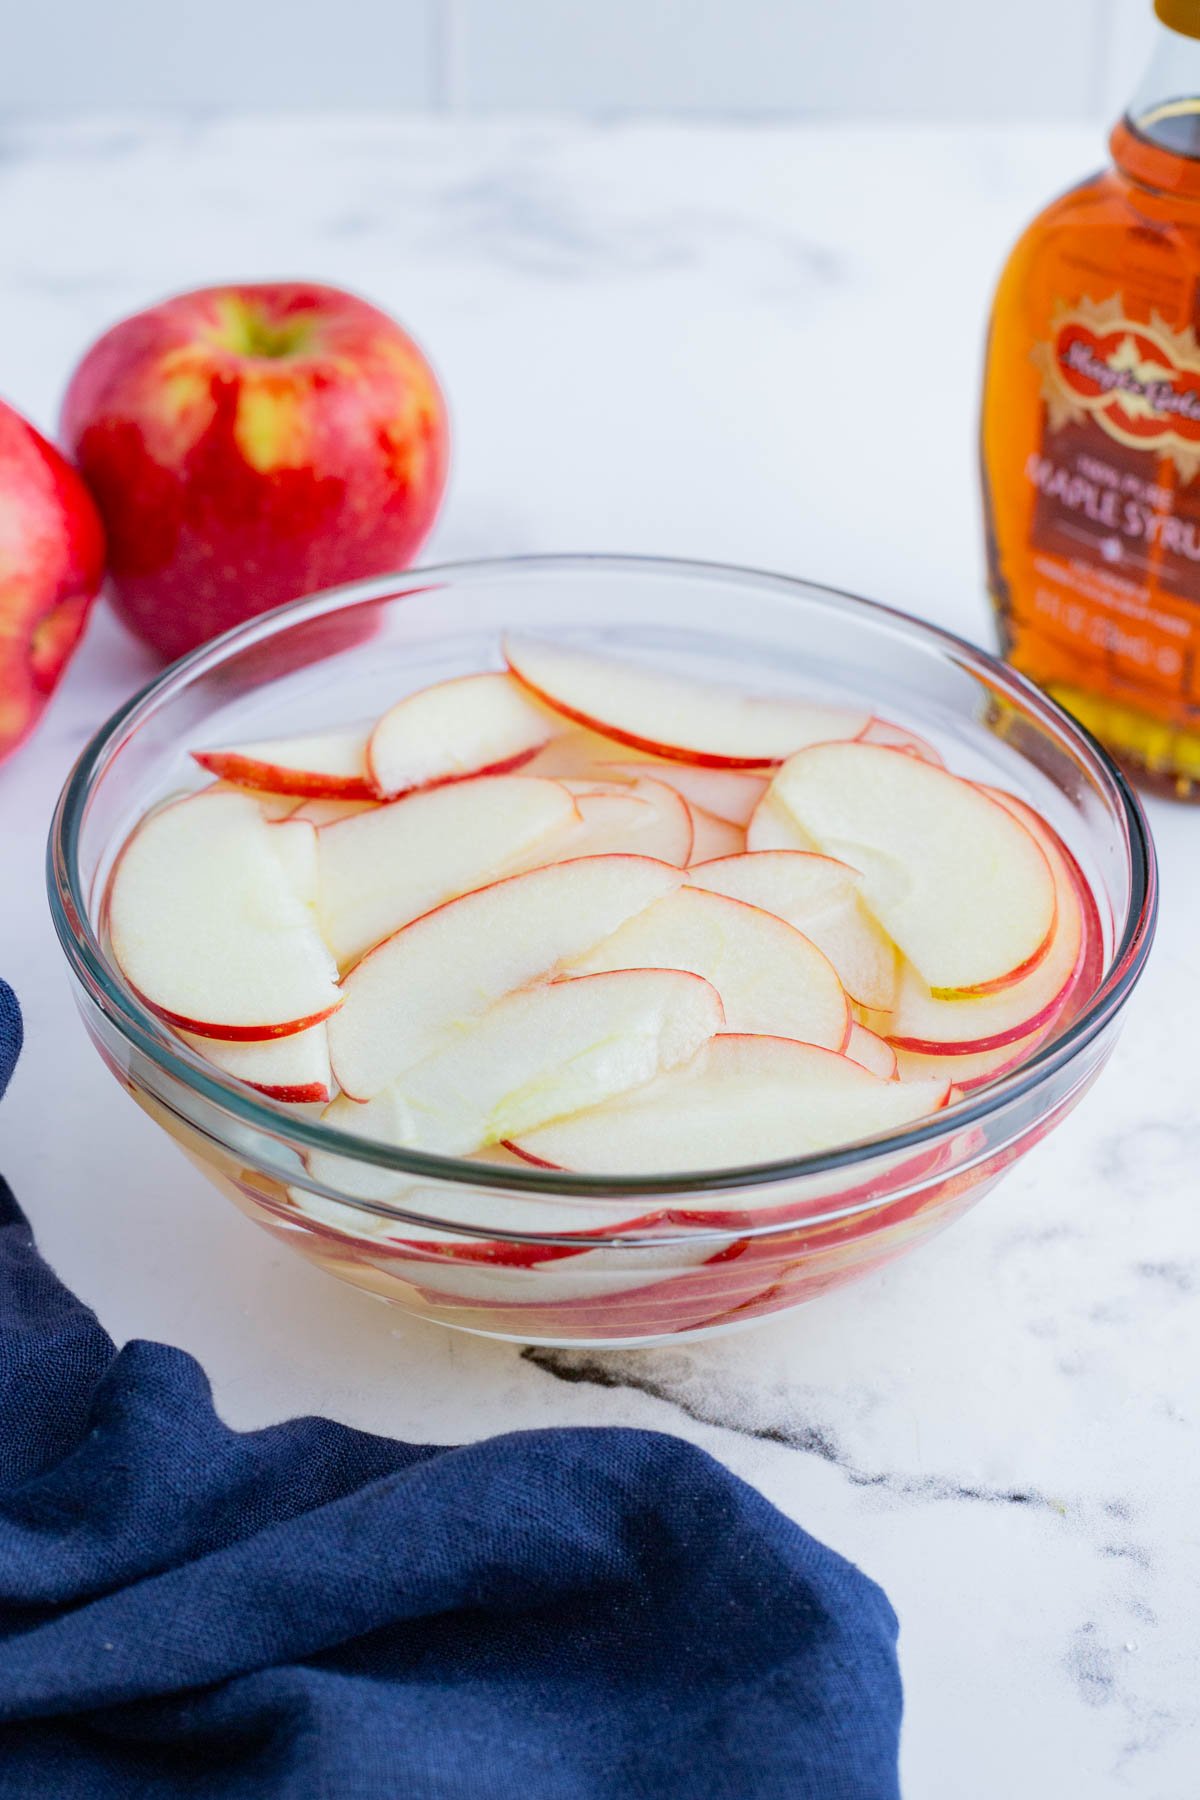 Thinly sliced apples being soaked in honey water in a glass bowl.